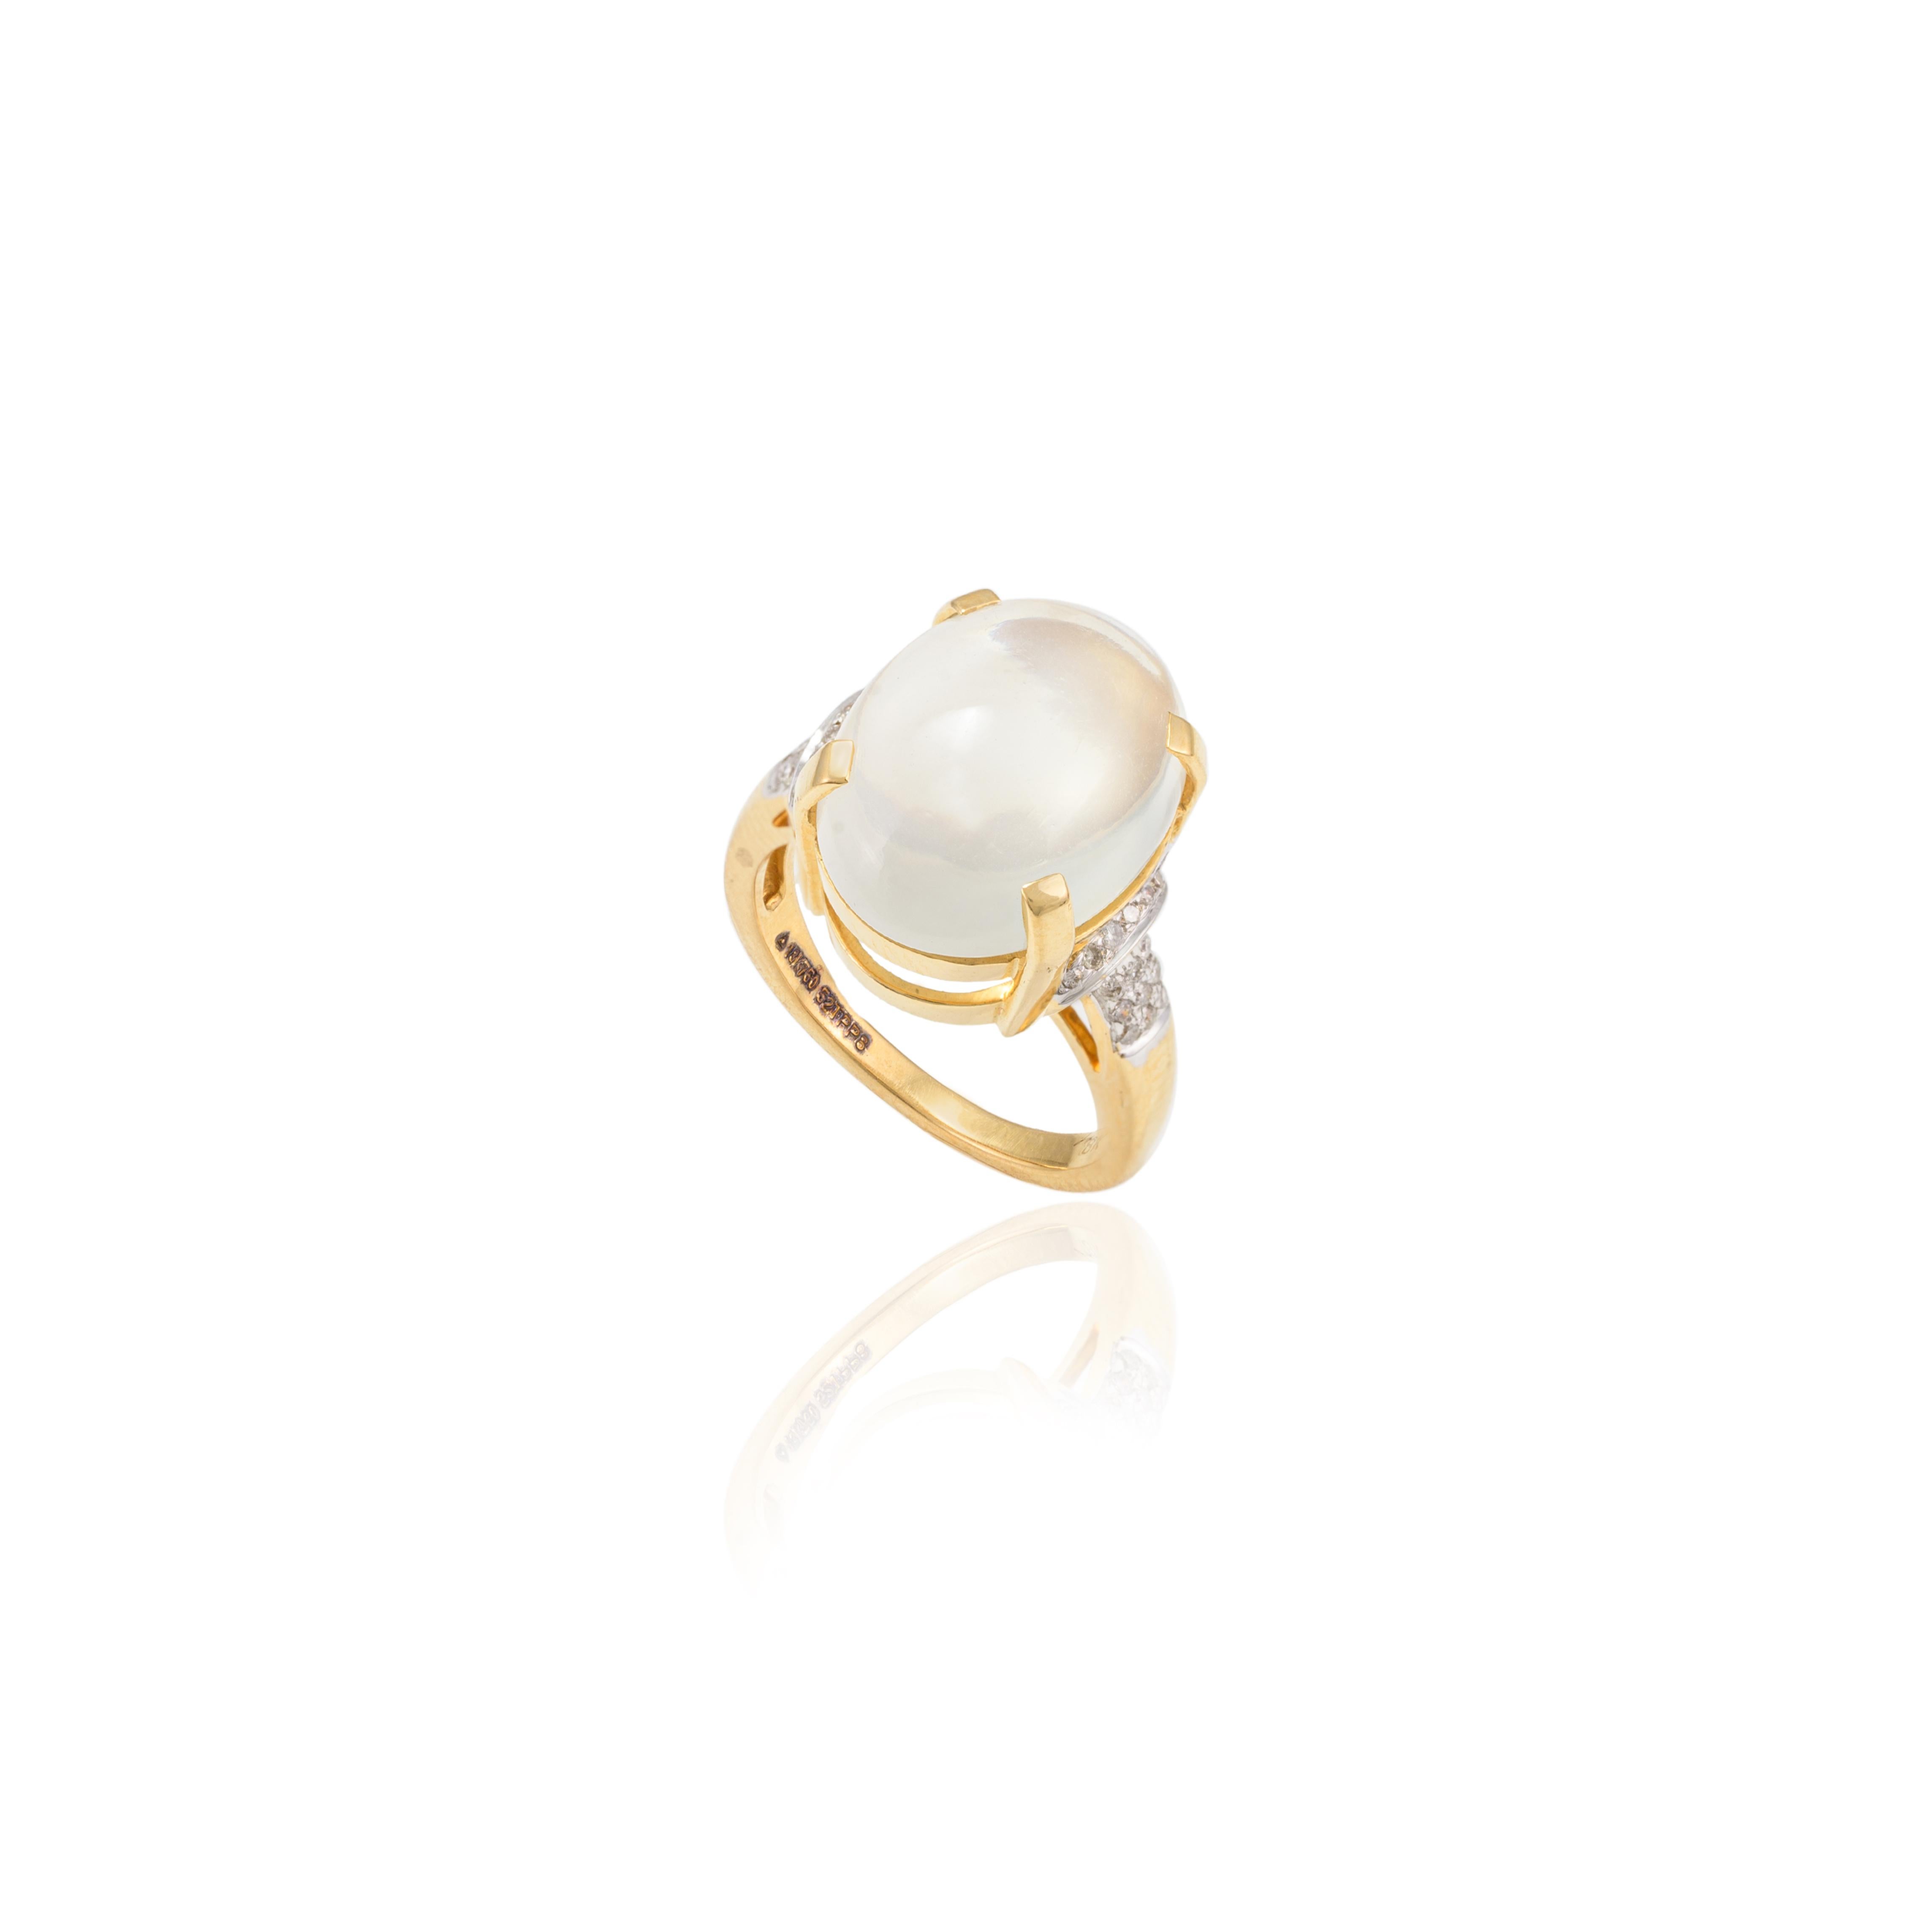 For Sale:  Diamond and 8.6 CTW Center Moonstone Cocktail Ring in 18k Solid Yellow Gold 3